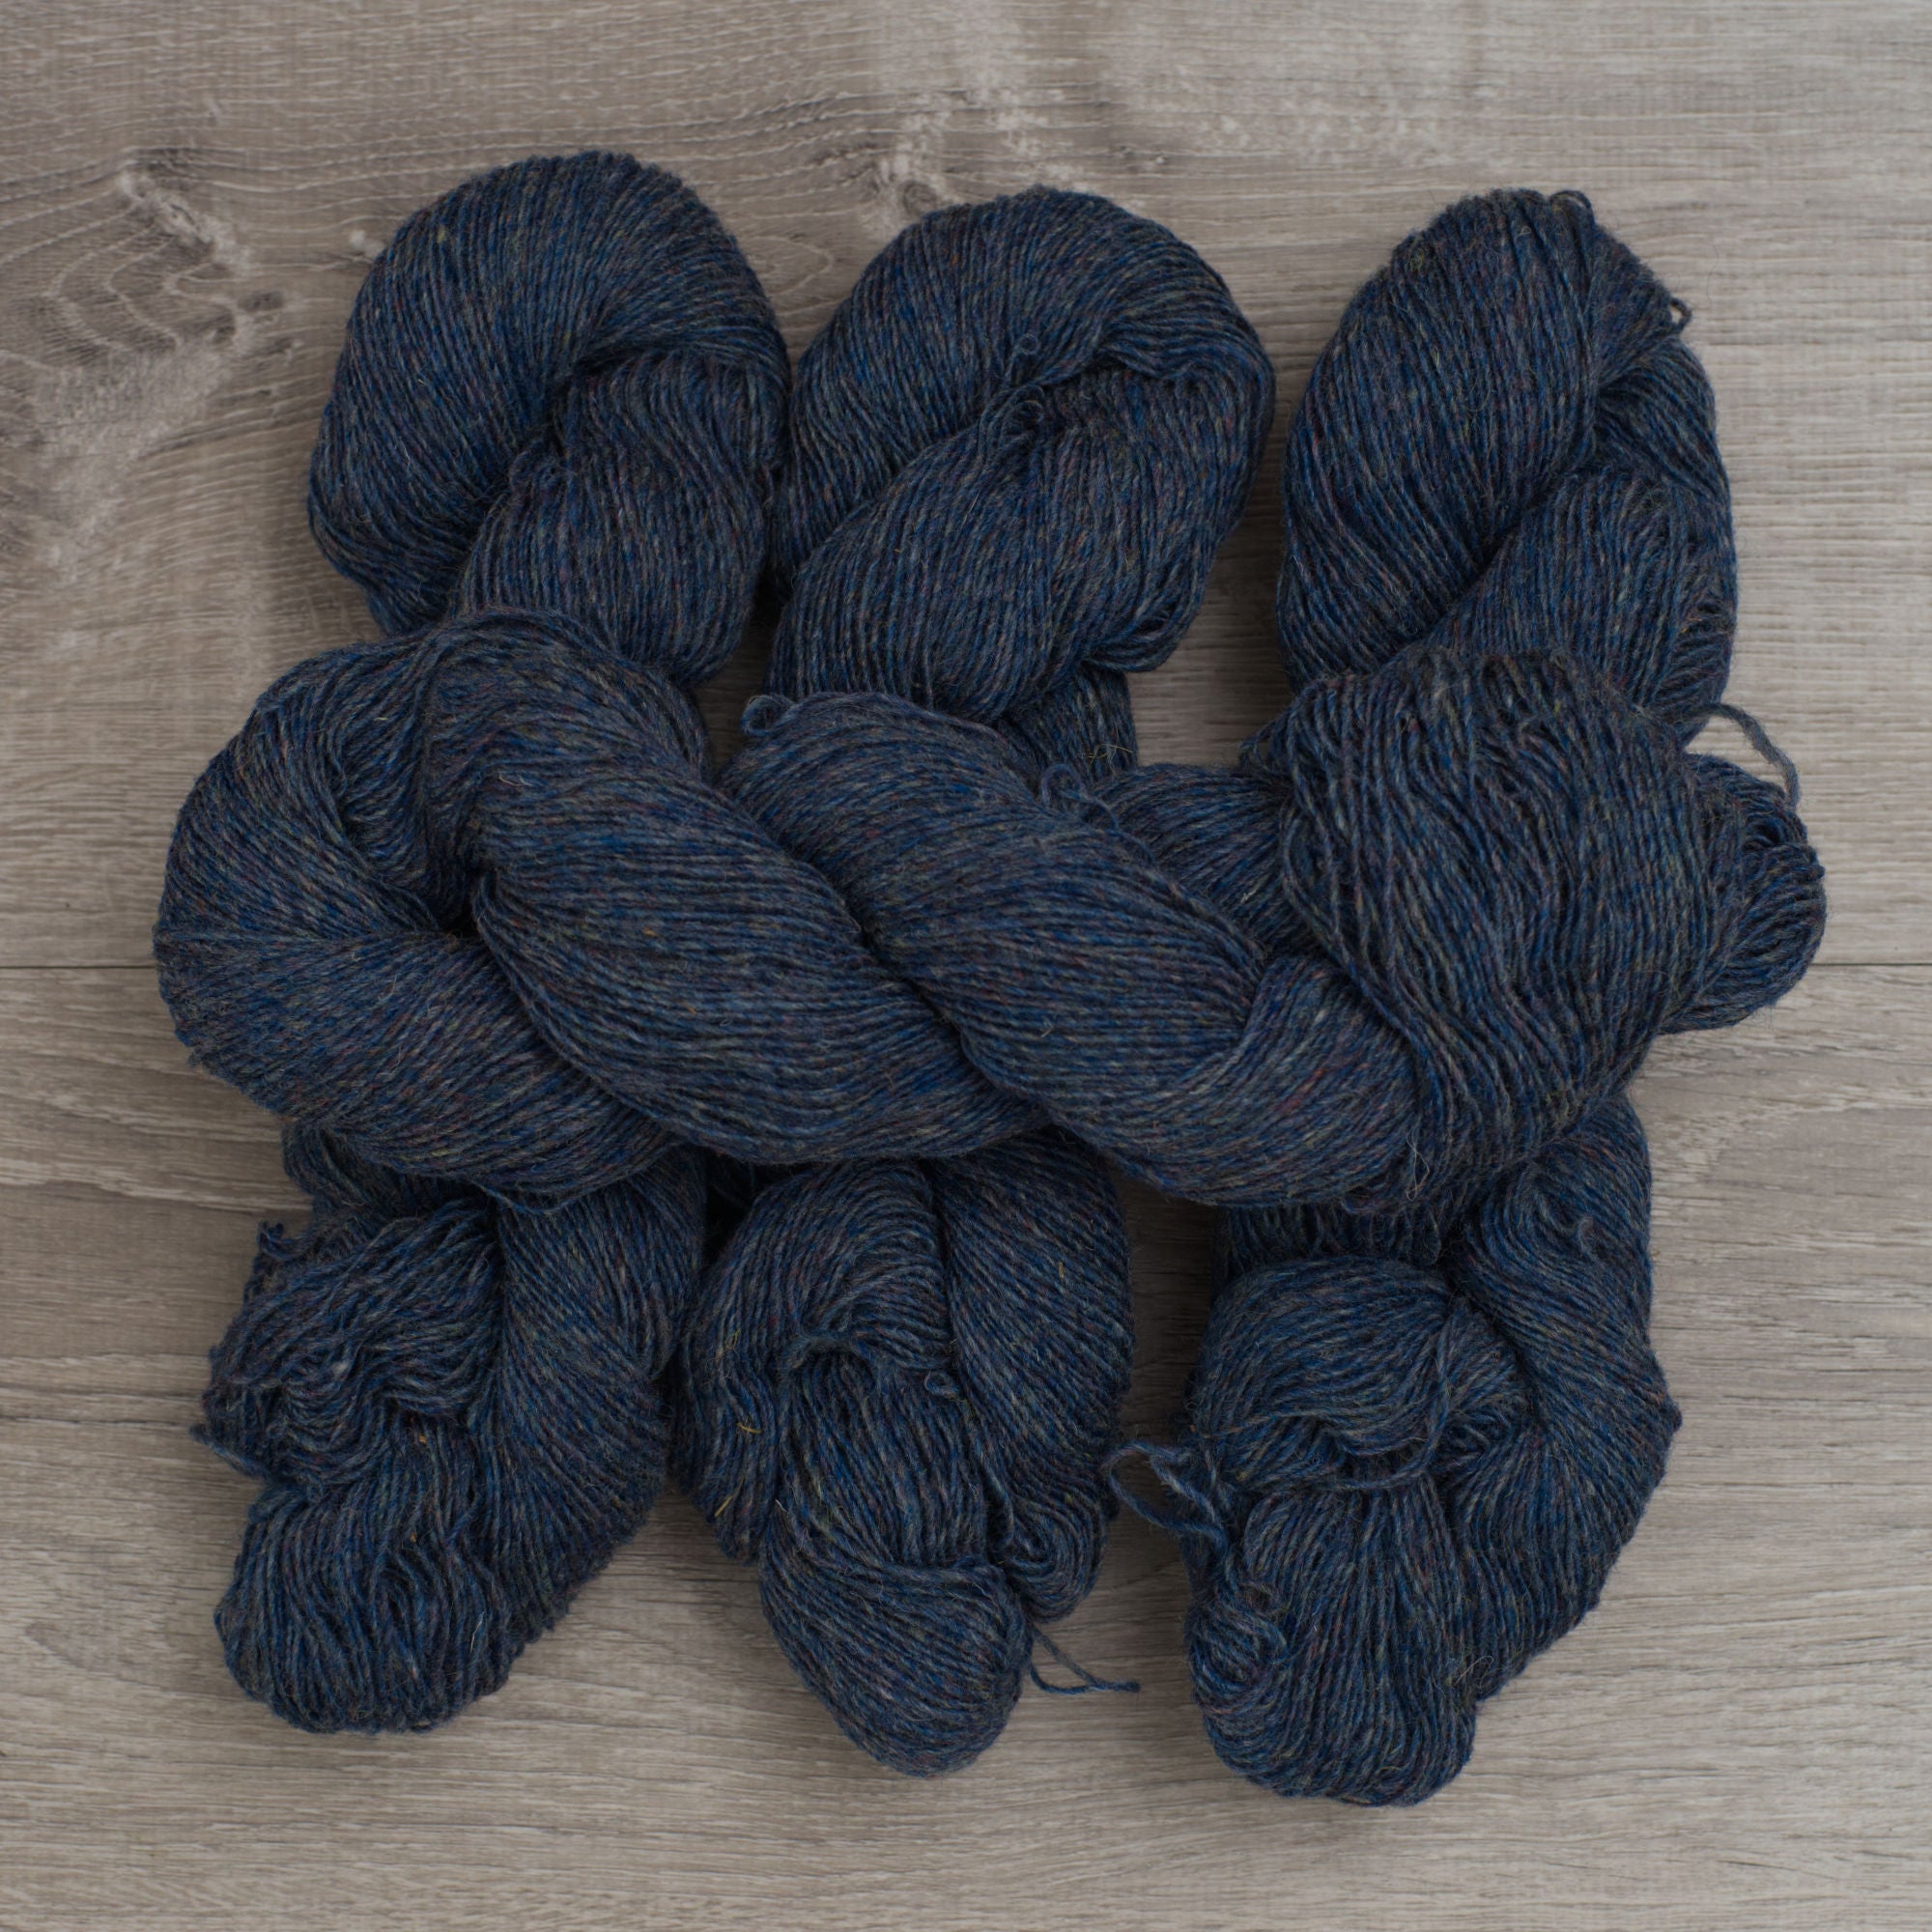 4 skeins of Topsy Farms' blue heather yarn in fingering weight, on a grey barn board background